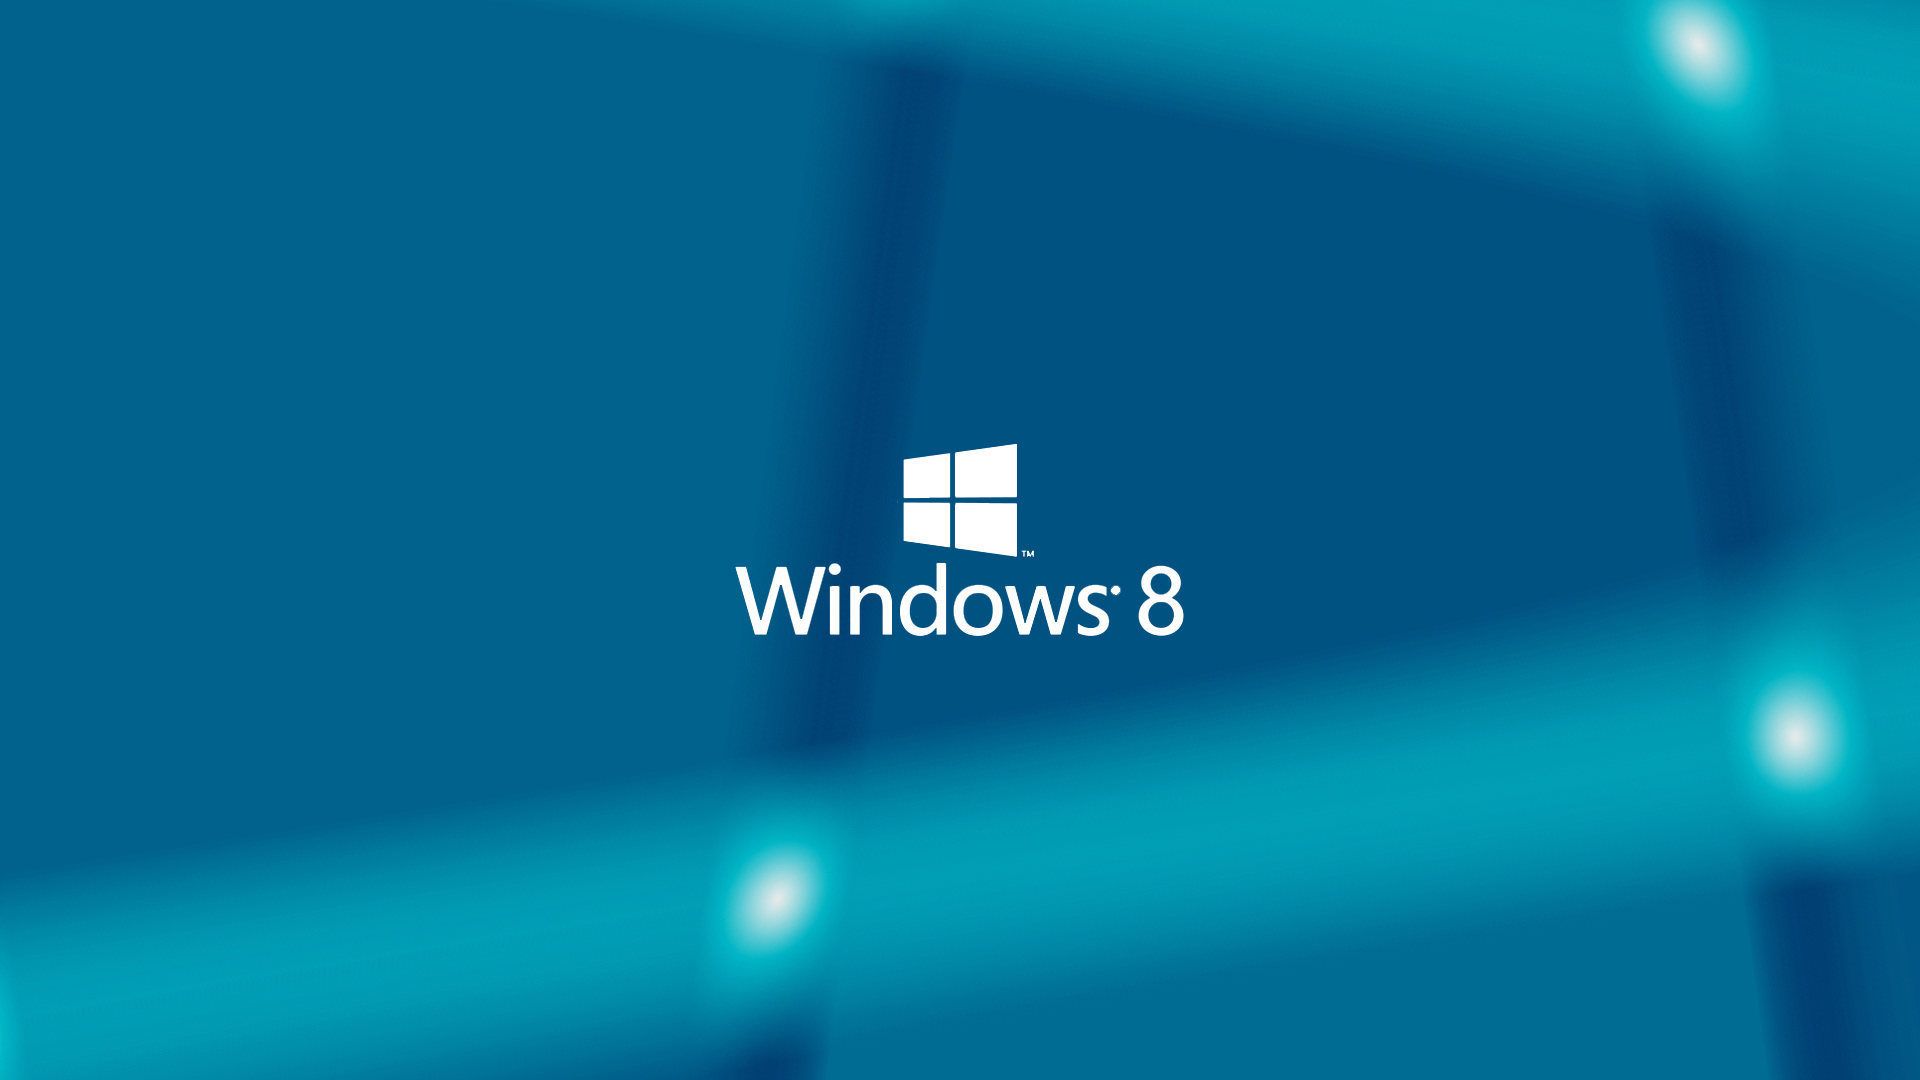 This is the image of windows 8 logo